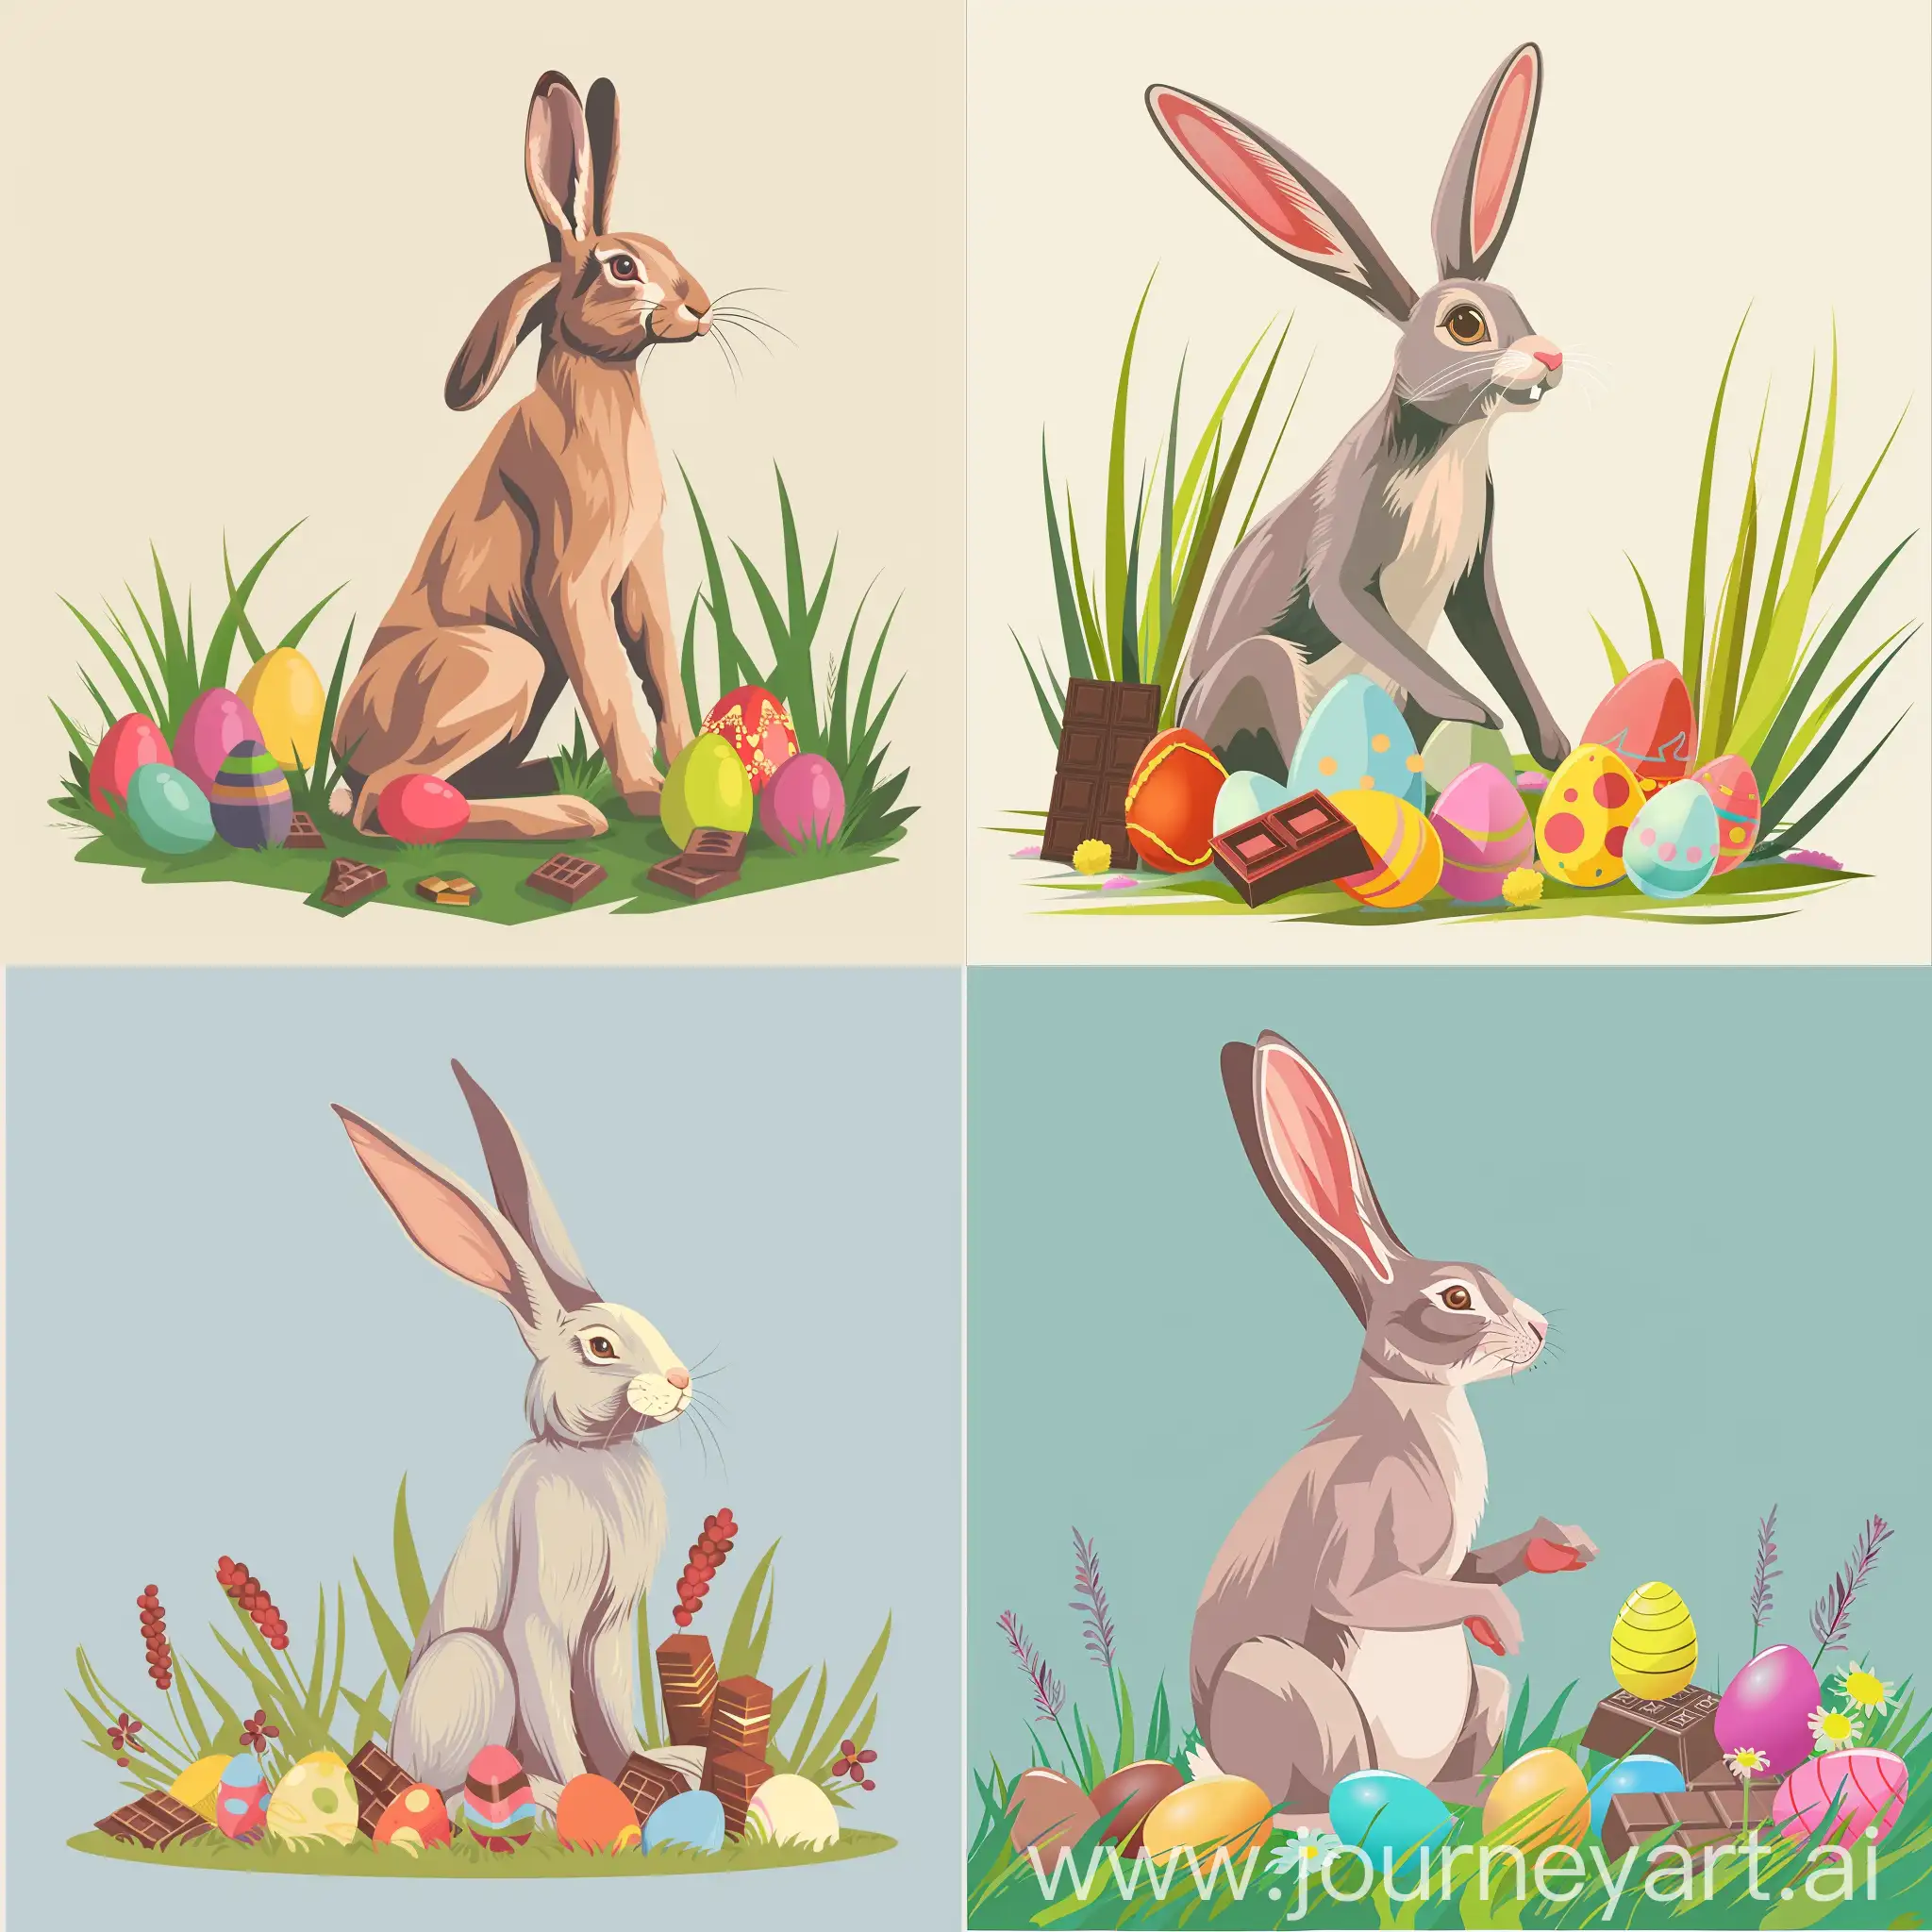 Easter-Bunny-with-Vibrant-Eggs-and-Chocolates-on-Lush-Grass